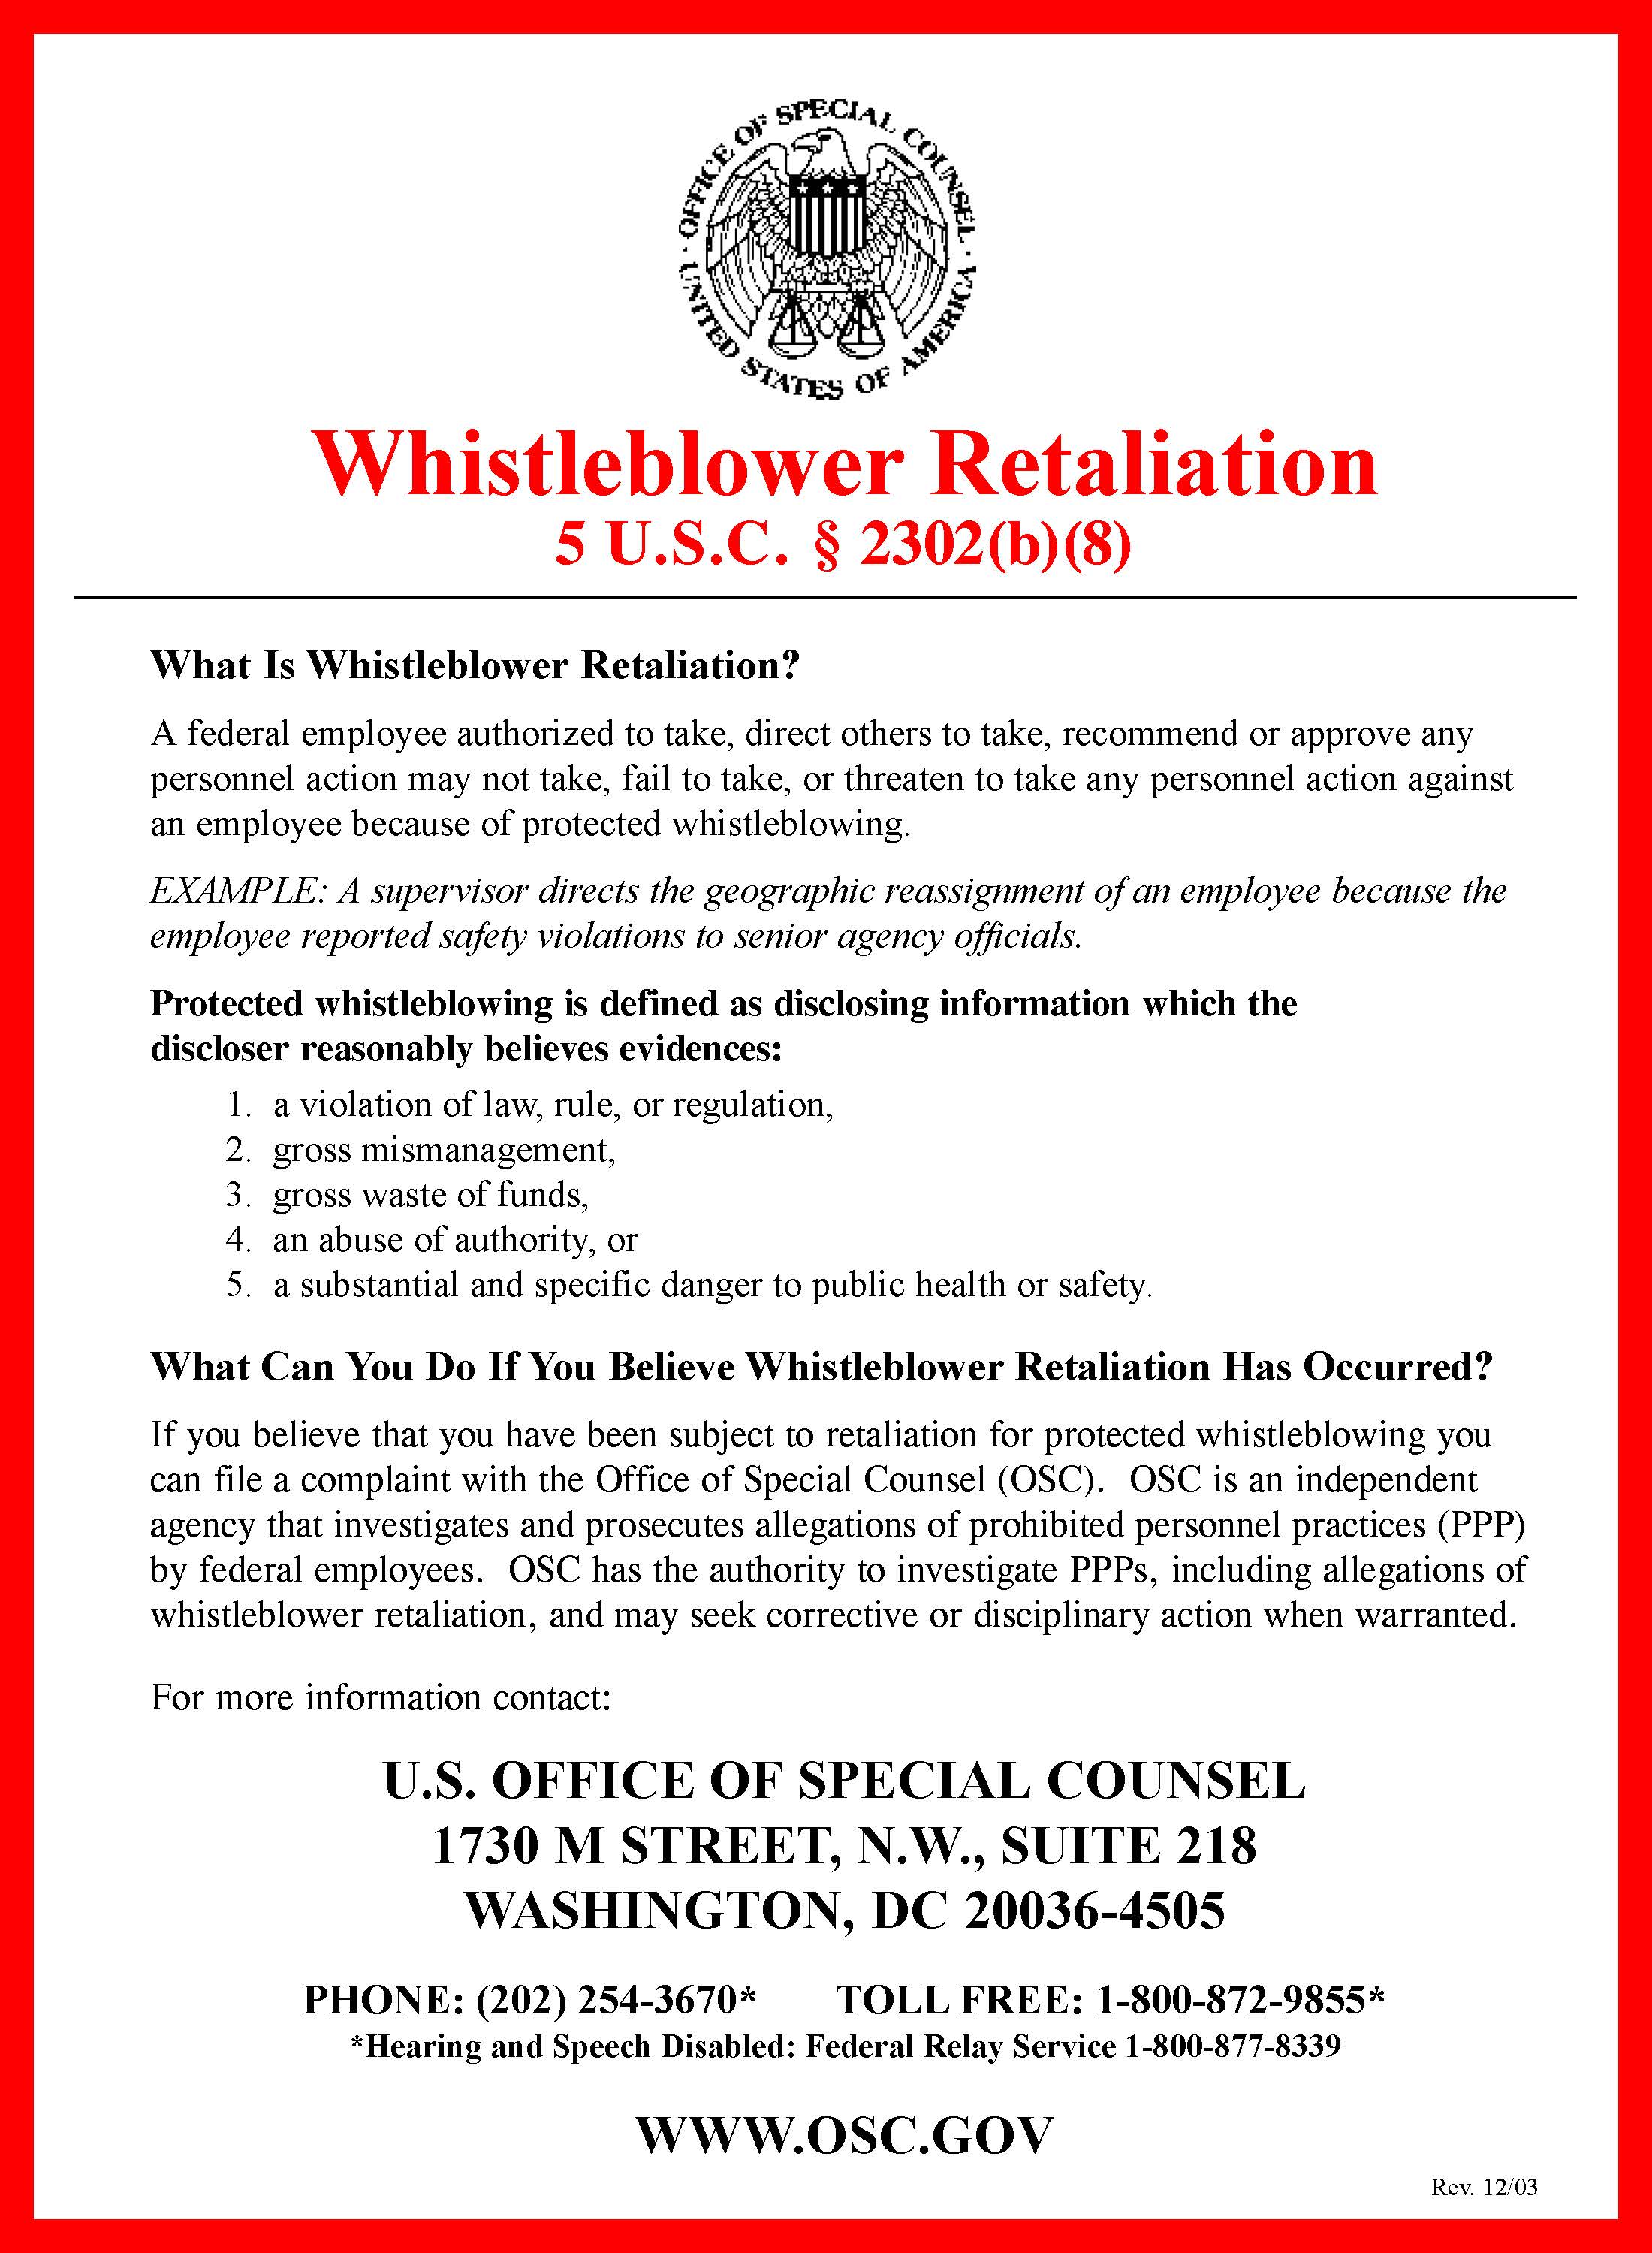 graphic for whistle blower